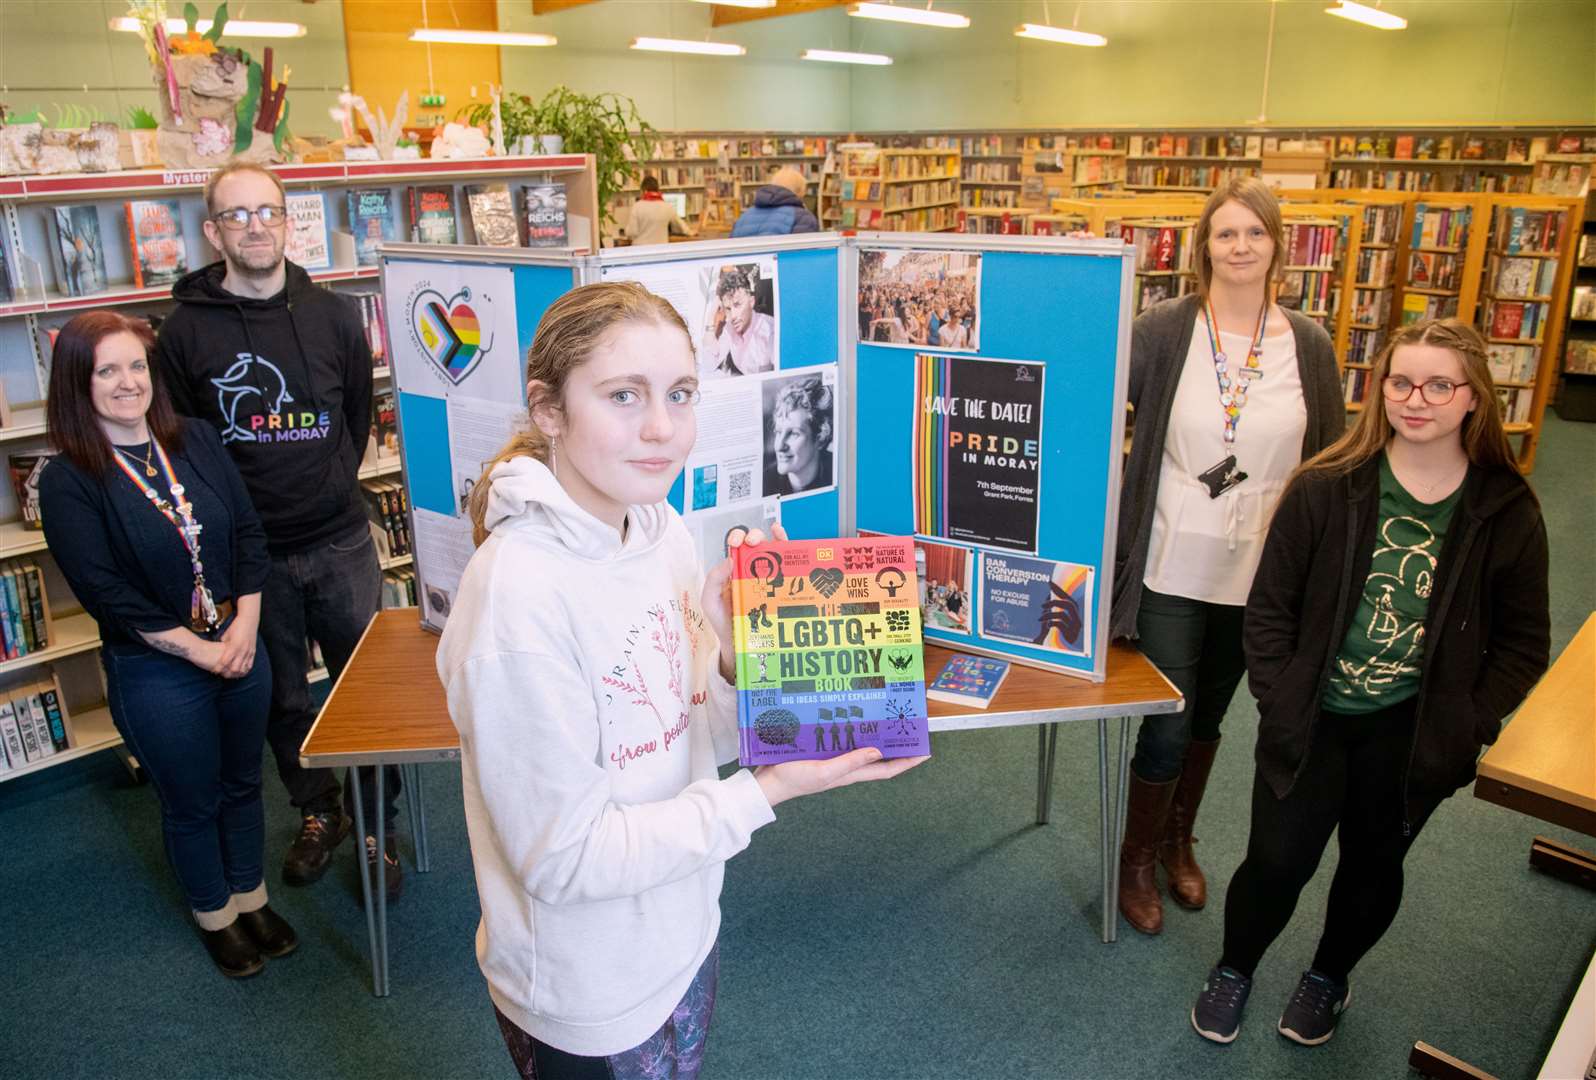 At the exhibition in Forres Library (from left) Emma Matthias (Pupil Support Worker SEBN), David Harrison (Chair of Pride in Moray), Hayley Curran (S3), Dorothy Ross (PT Raising Attainment) and Katie Sommerville (S3). Picture: Daniel Forsyth